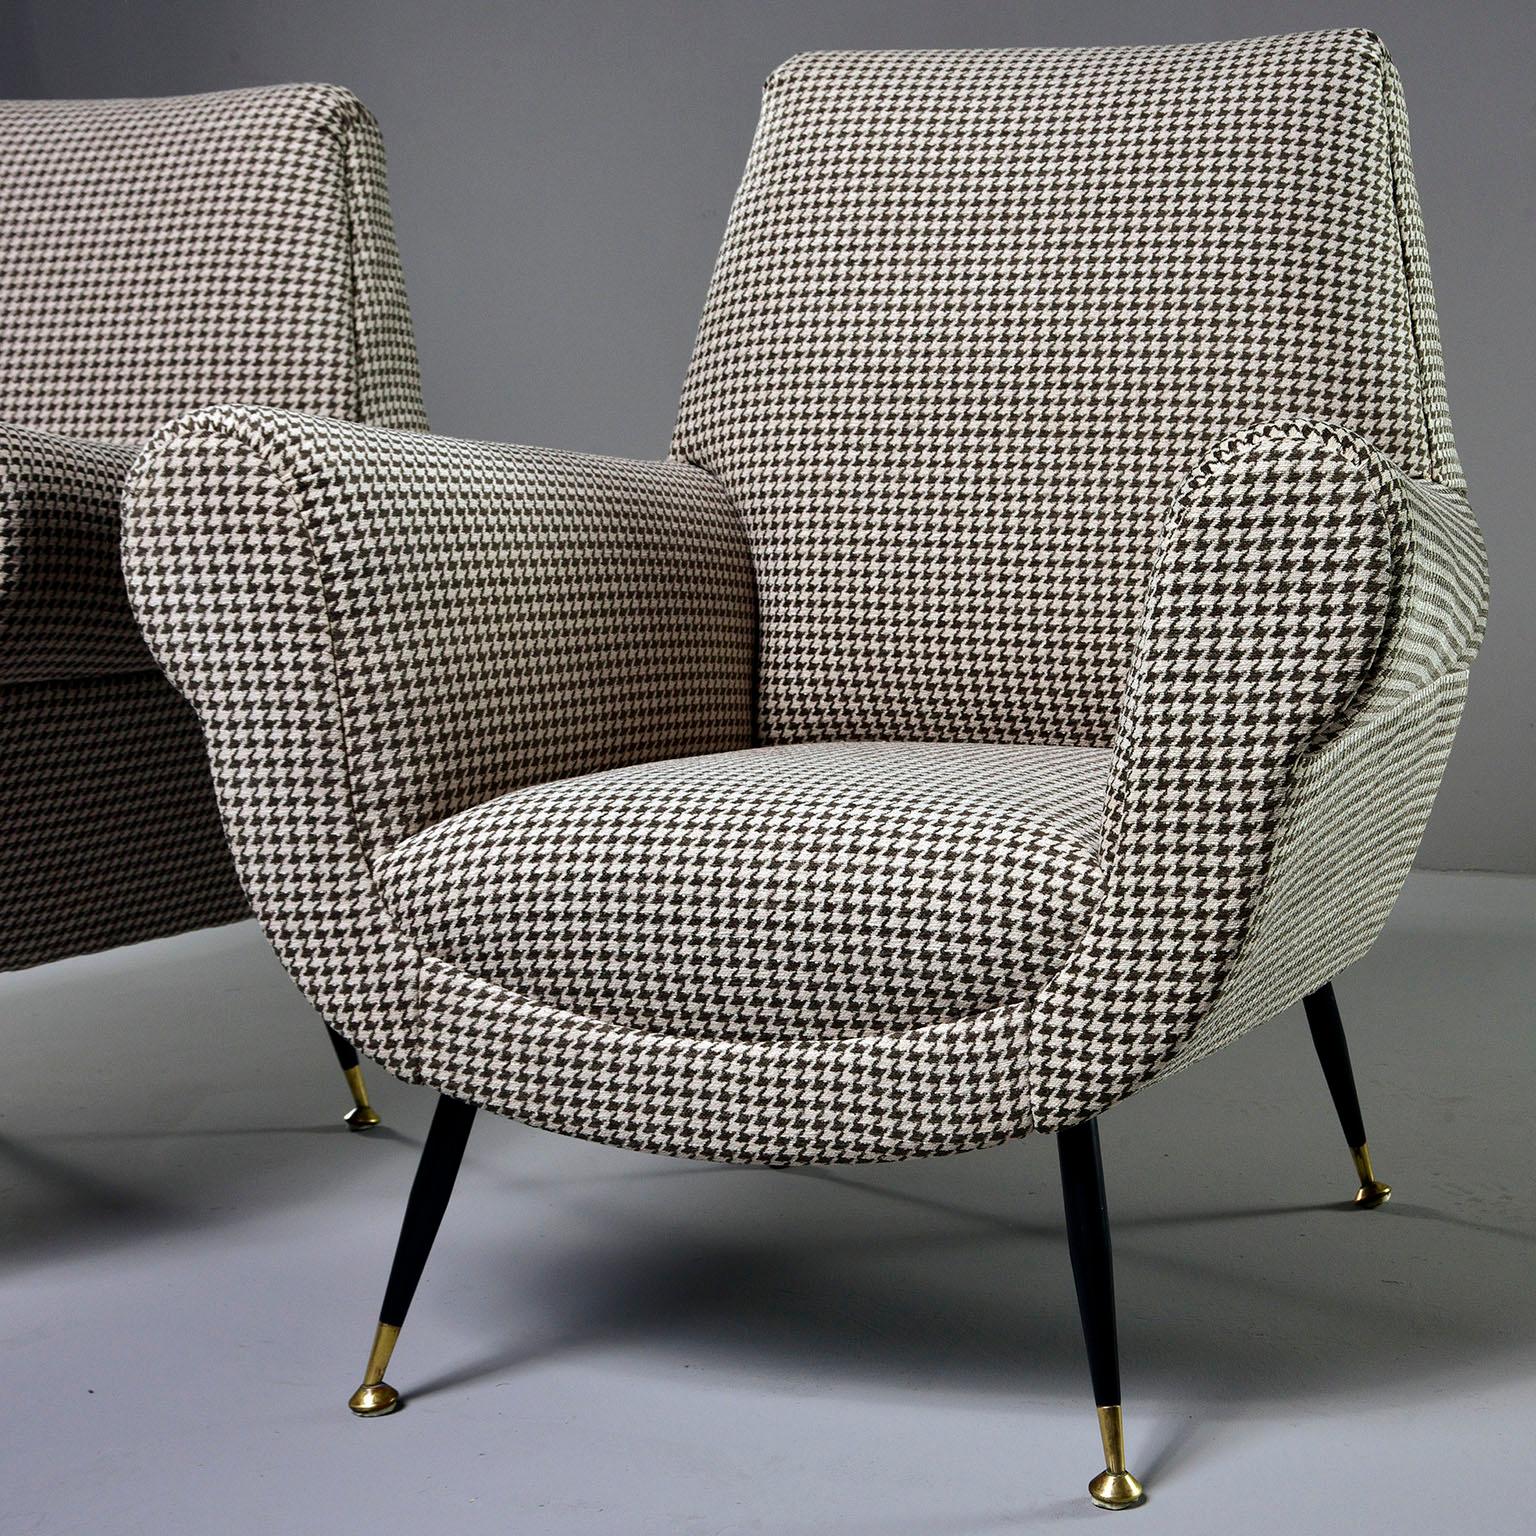 20th Century Pair of Newly Upholstered Chairs by Gigi Radice for Minotti